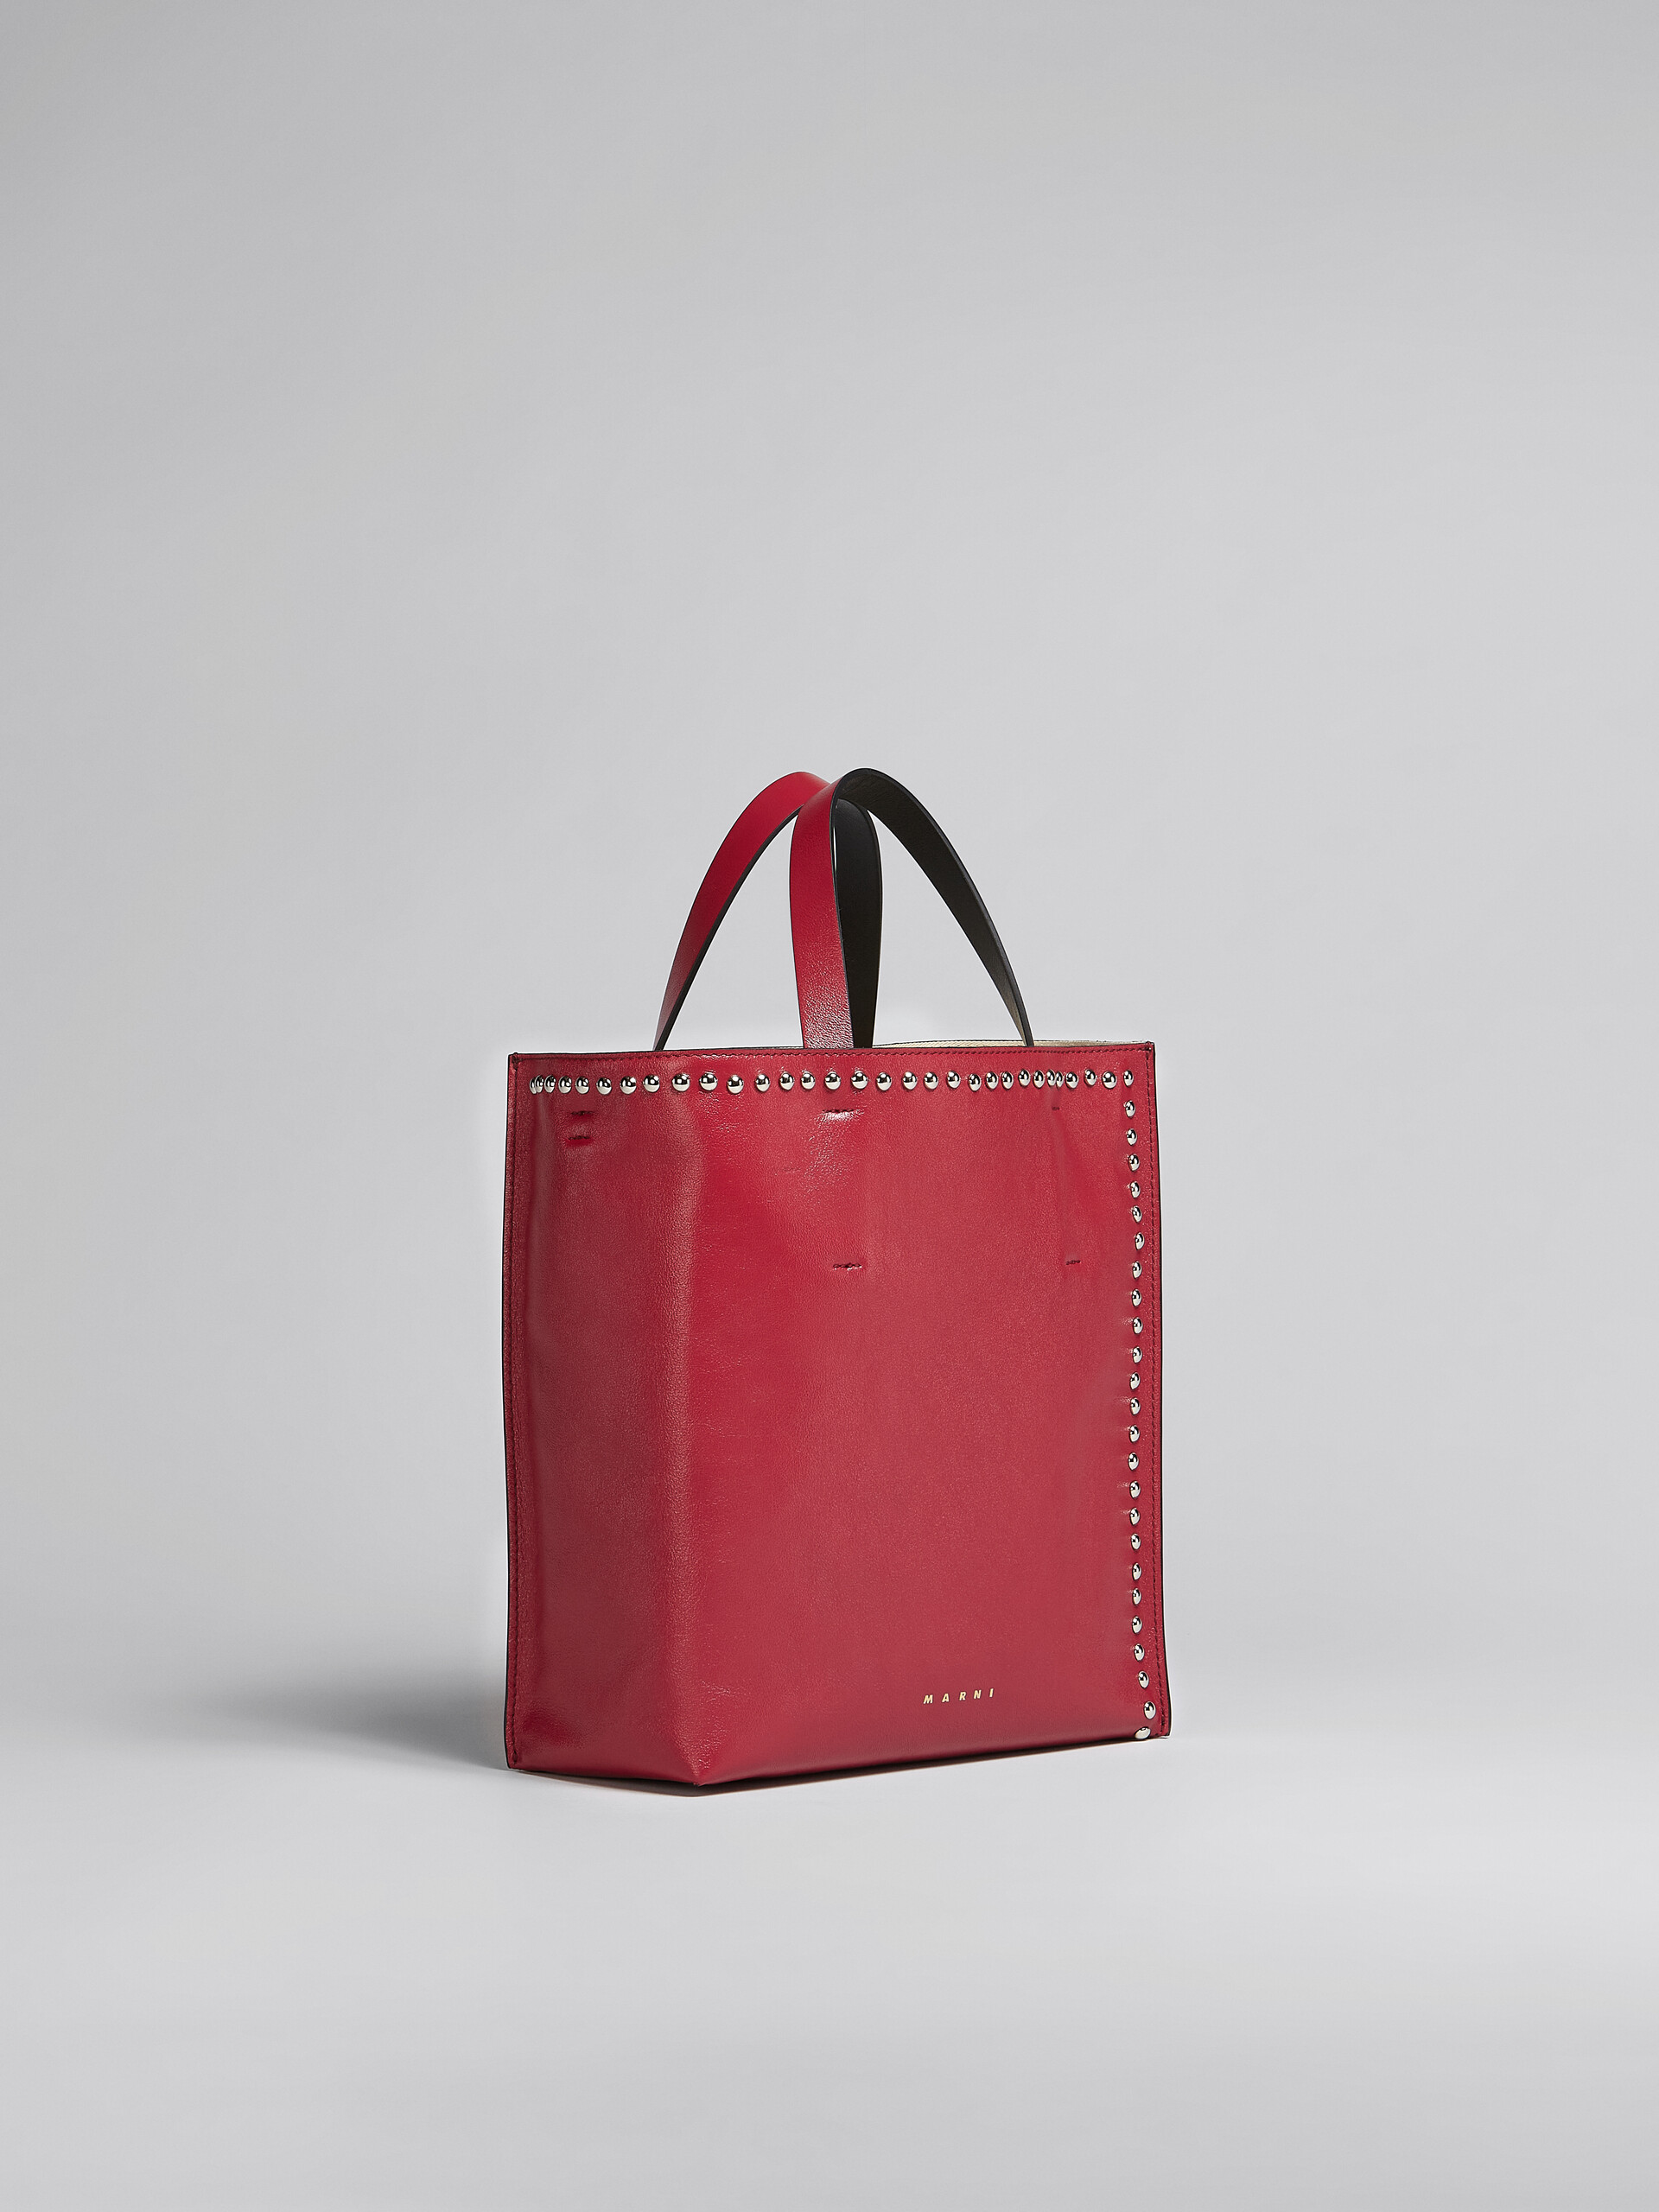 Museo Soft Small Bag in red and black leather with studs - Shopping Bags - Image 6